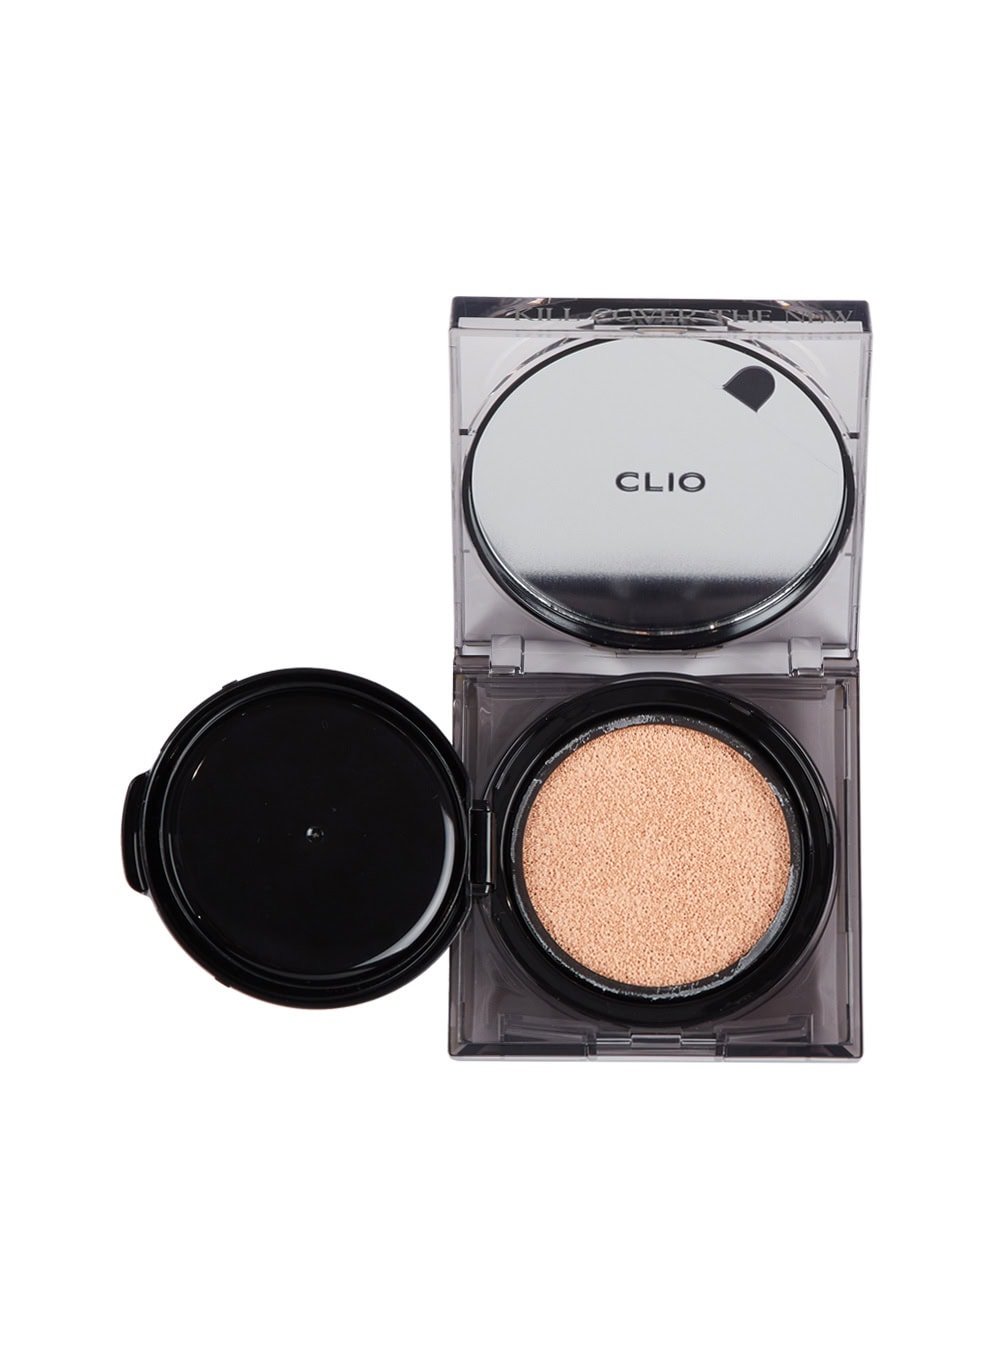 [Clio] Kill Cover The New Foundwear Cushion (15g*2) - 2 LINGERIE